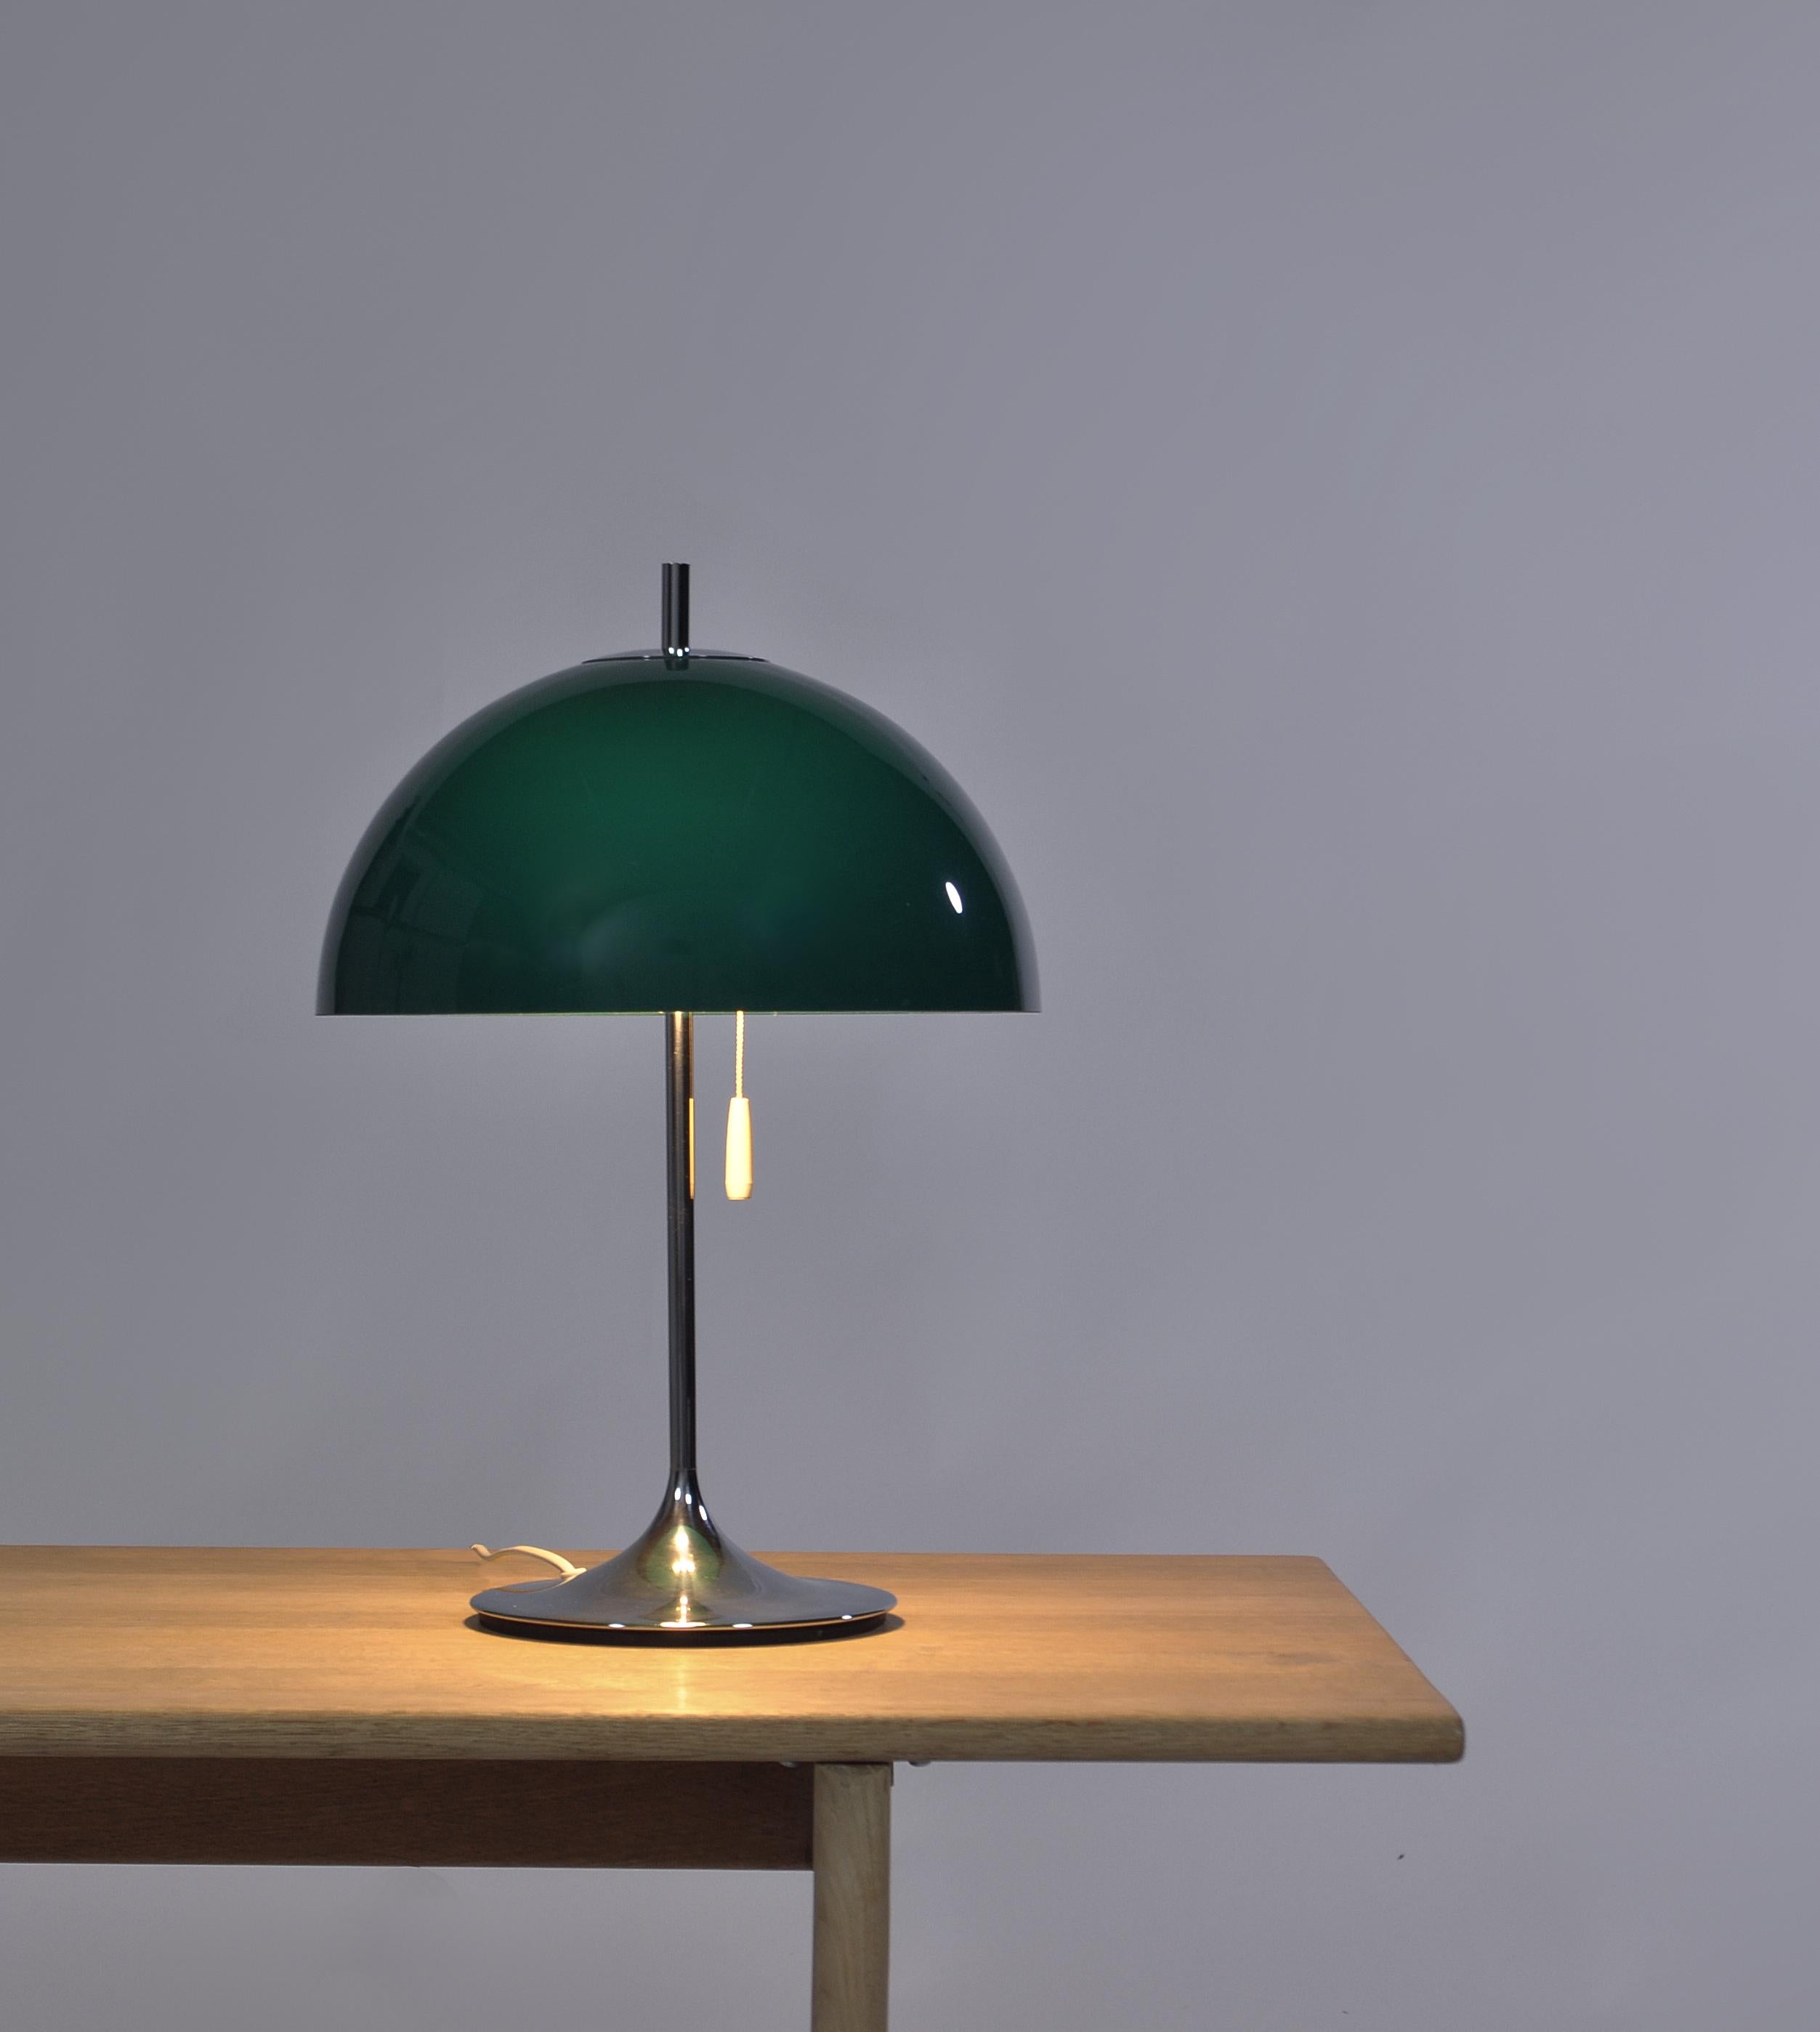 Cool Danish desk lamp from the late 1960s by Frank J. Bentler. The tulip shape base is chrome-plated and the shade is green acrylic. Two-light sources and original switch.